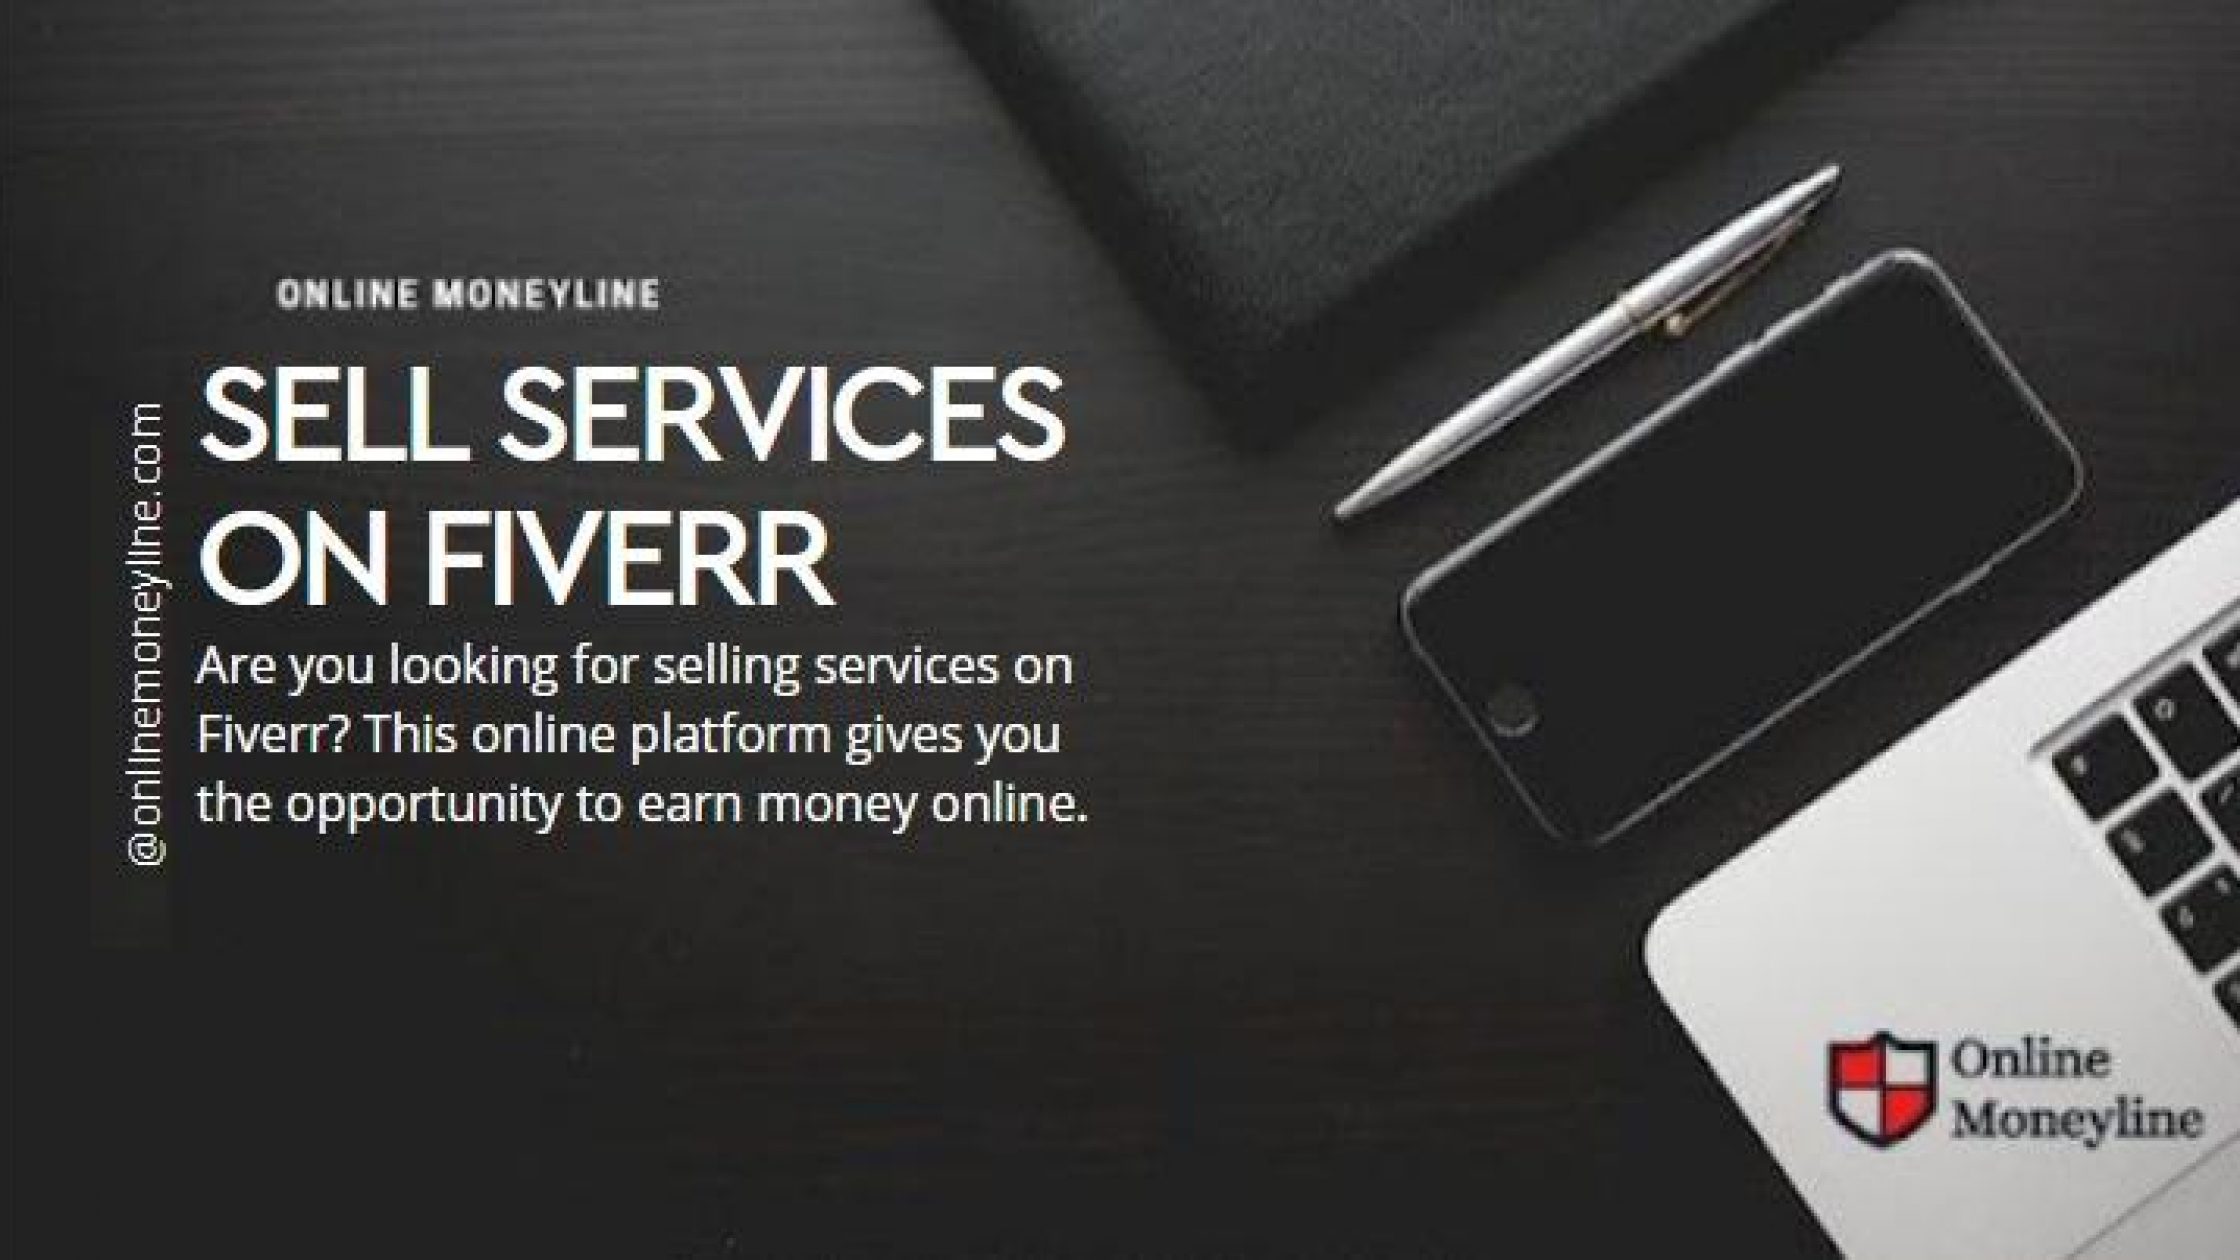 Sell services on Fiverr